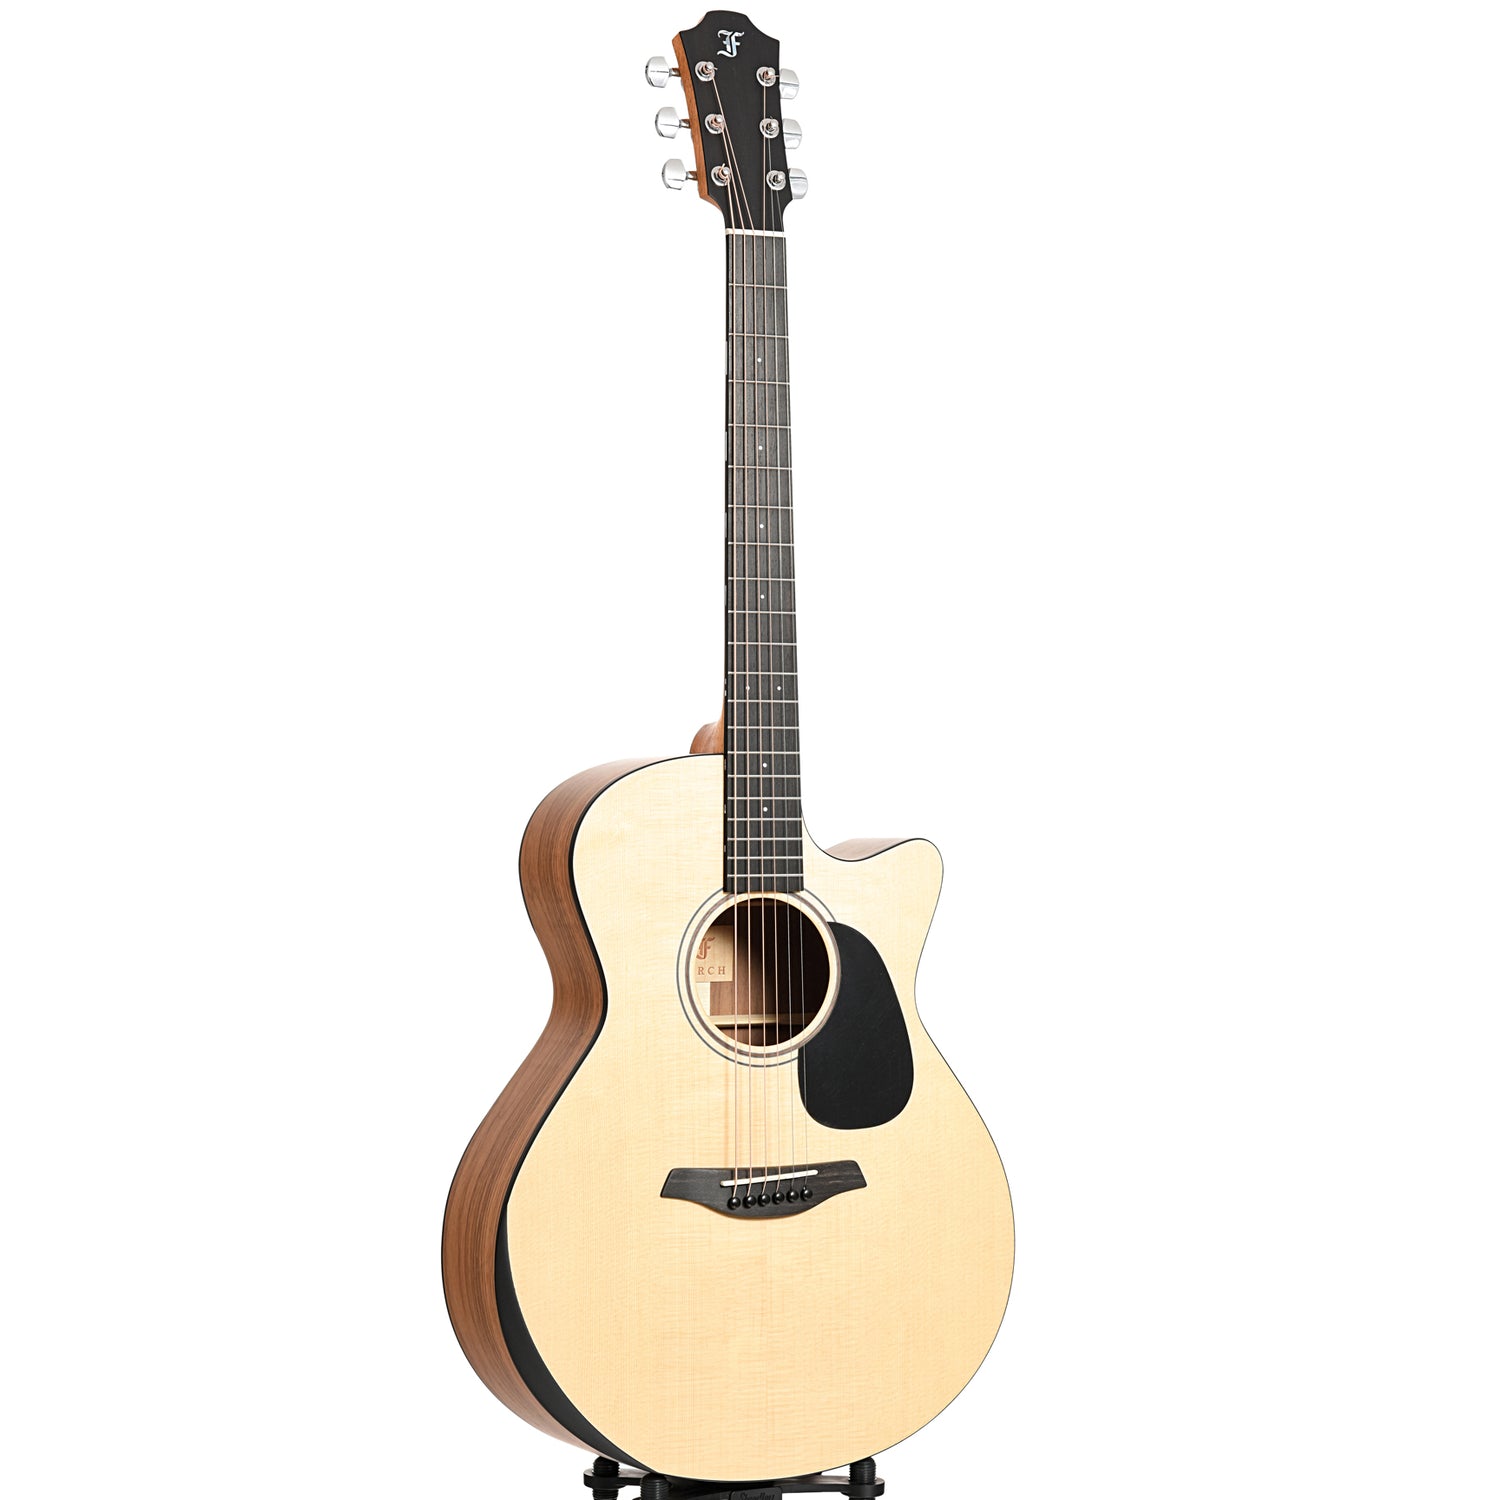 Image 11 of Furch Blue Deluxe Gc-SW Acoustic Guitar- SKU# FBDLX-GCSW : Product Type Flat-top Guitars : Elderly Instruments